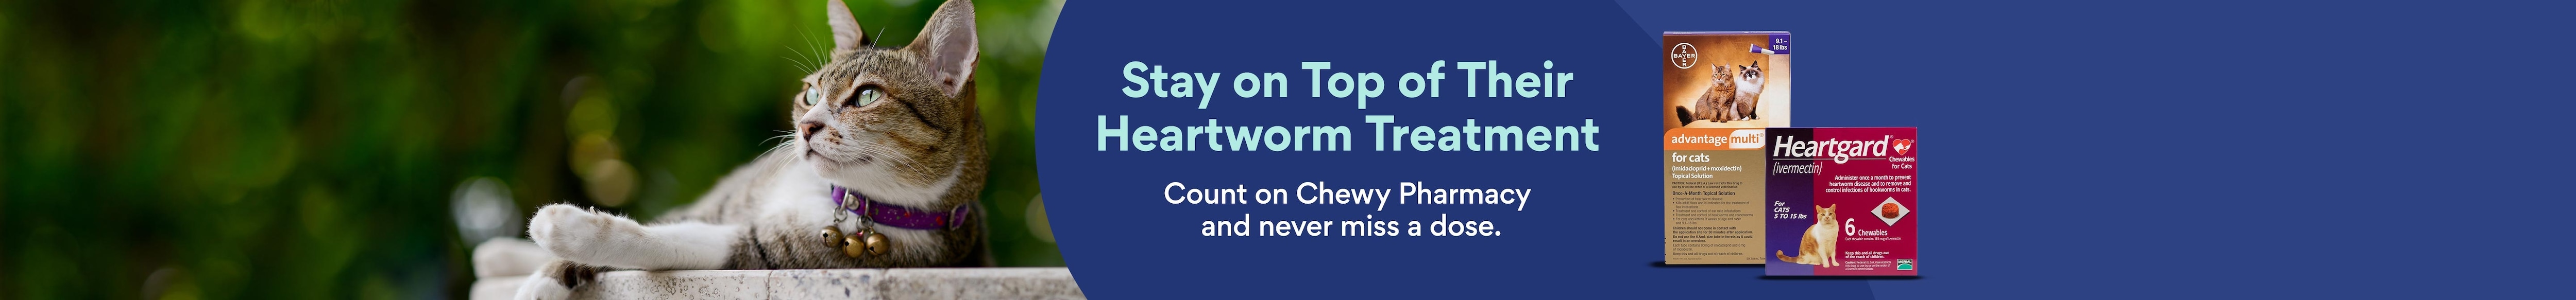 Stay on top of their heartworm treatment Count on Chewy Pharmacy and never miss a dose